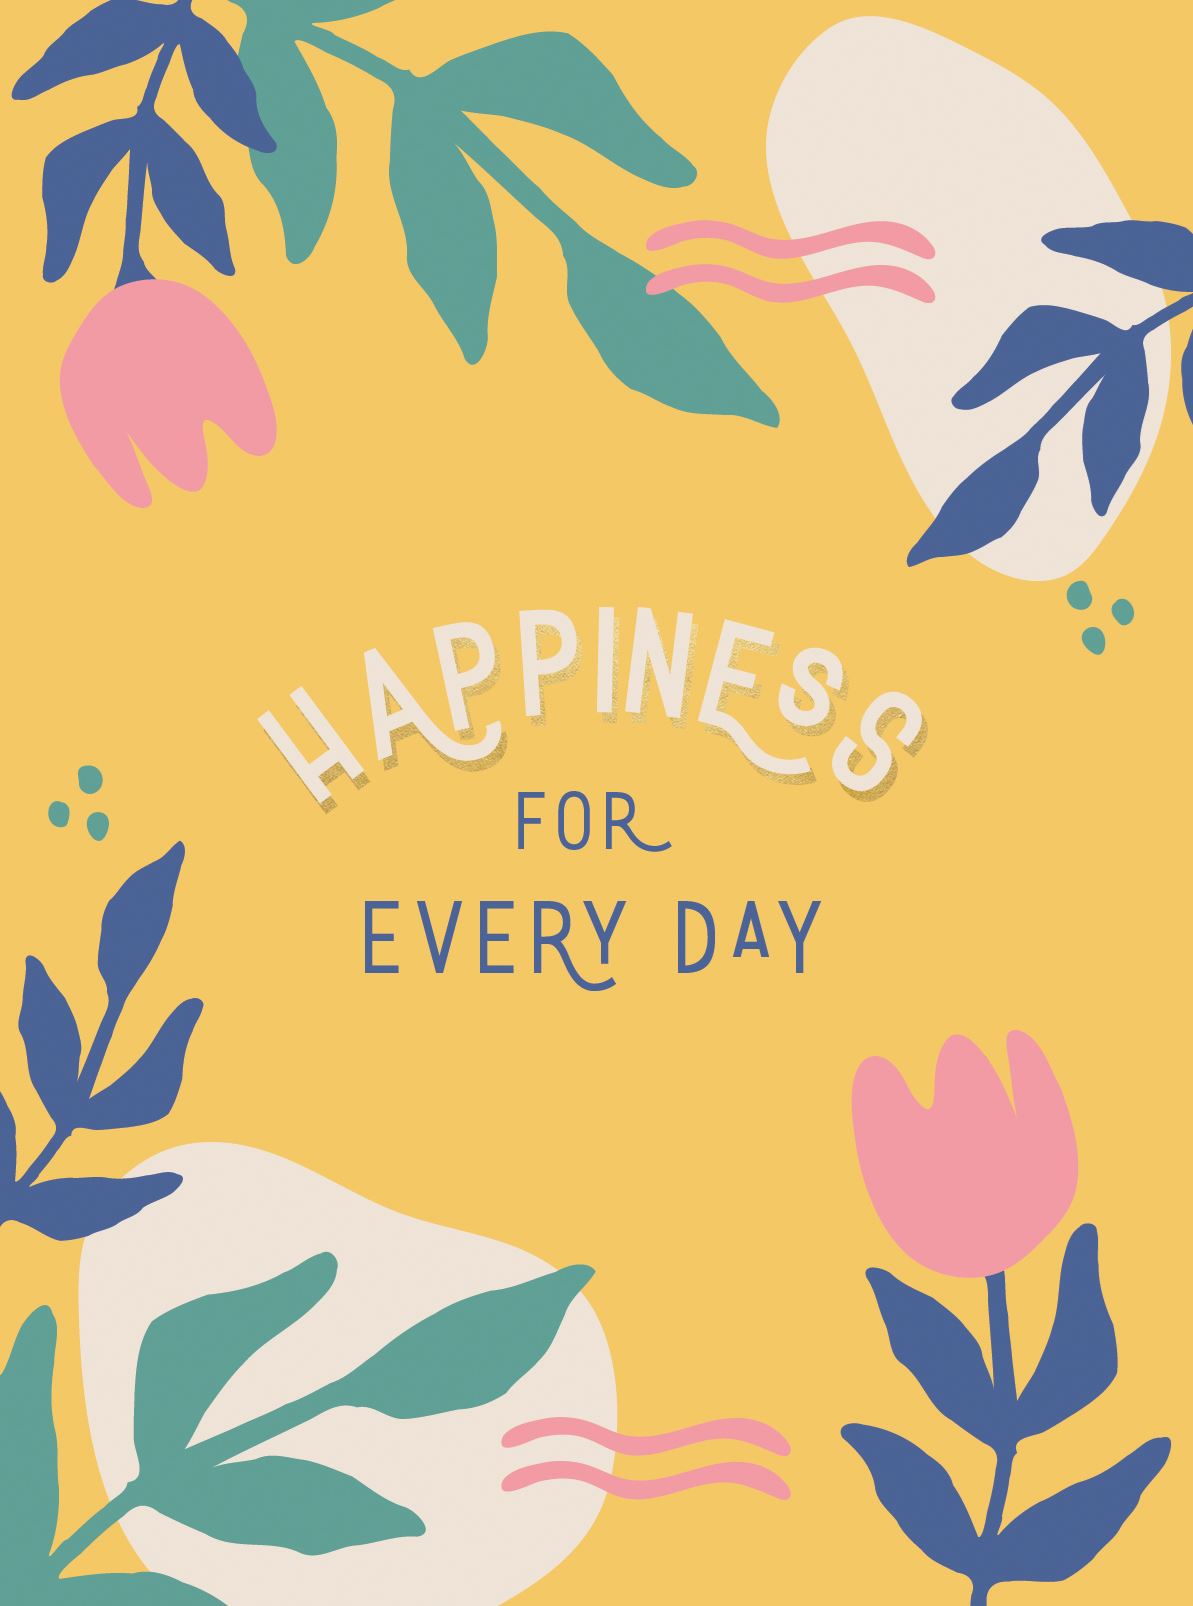 Book - Happiness for Everyday